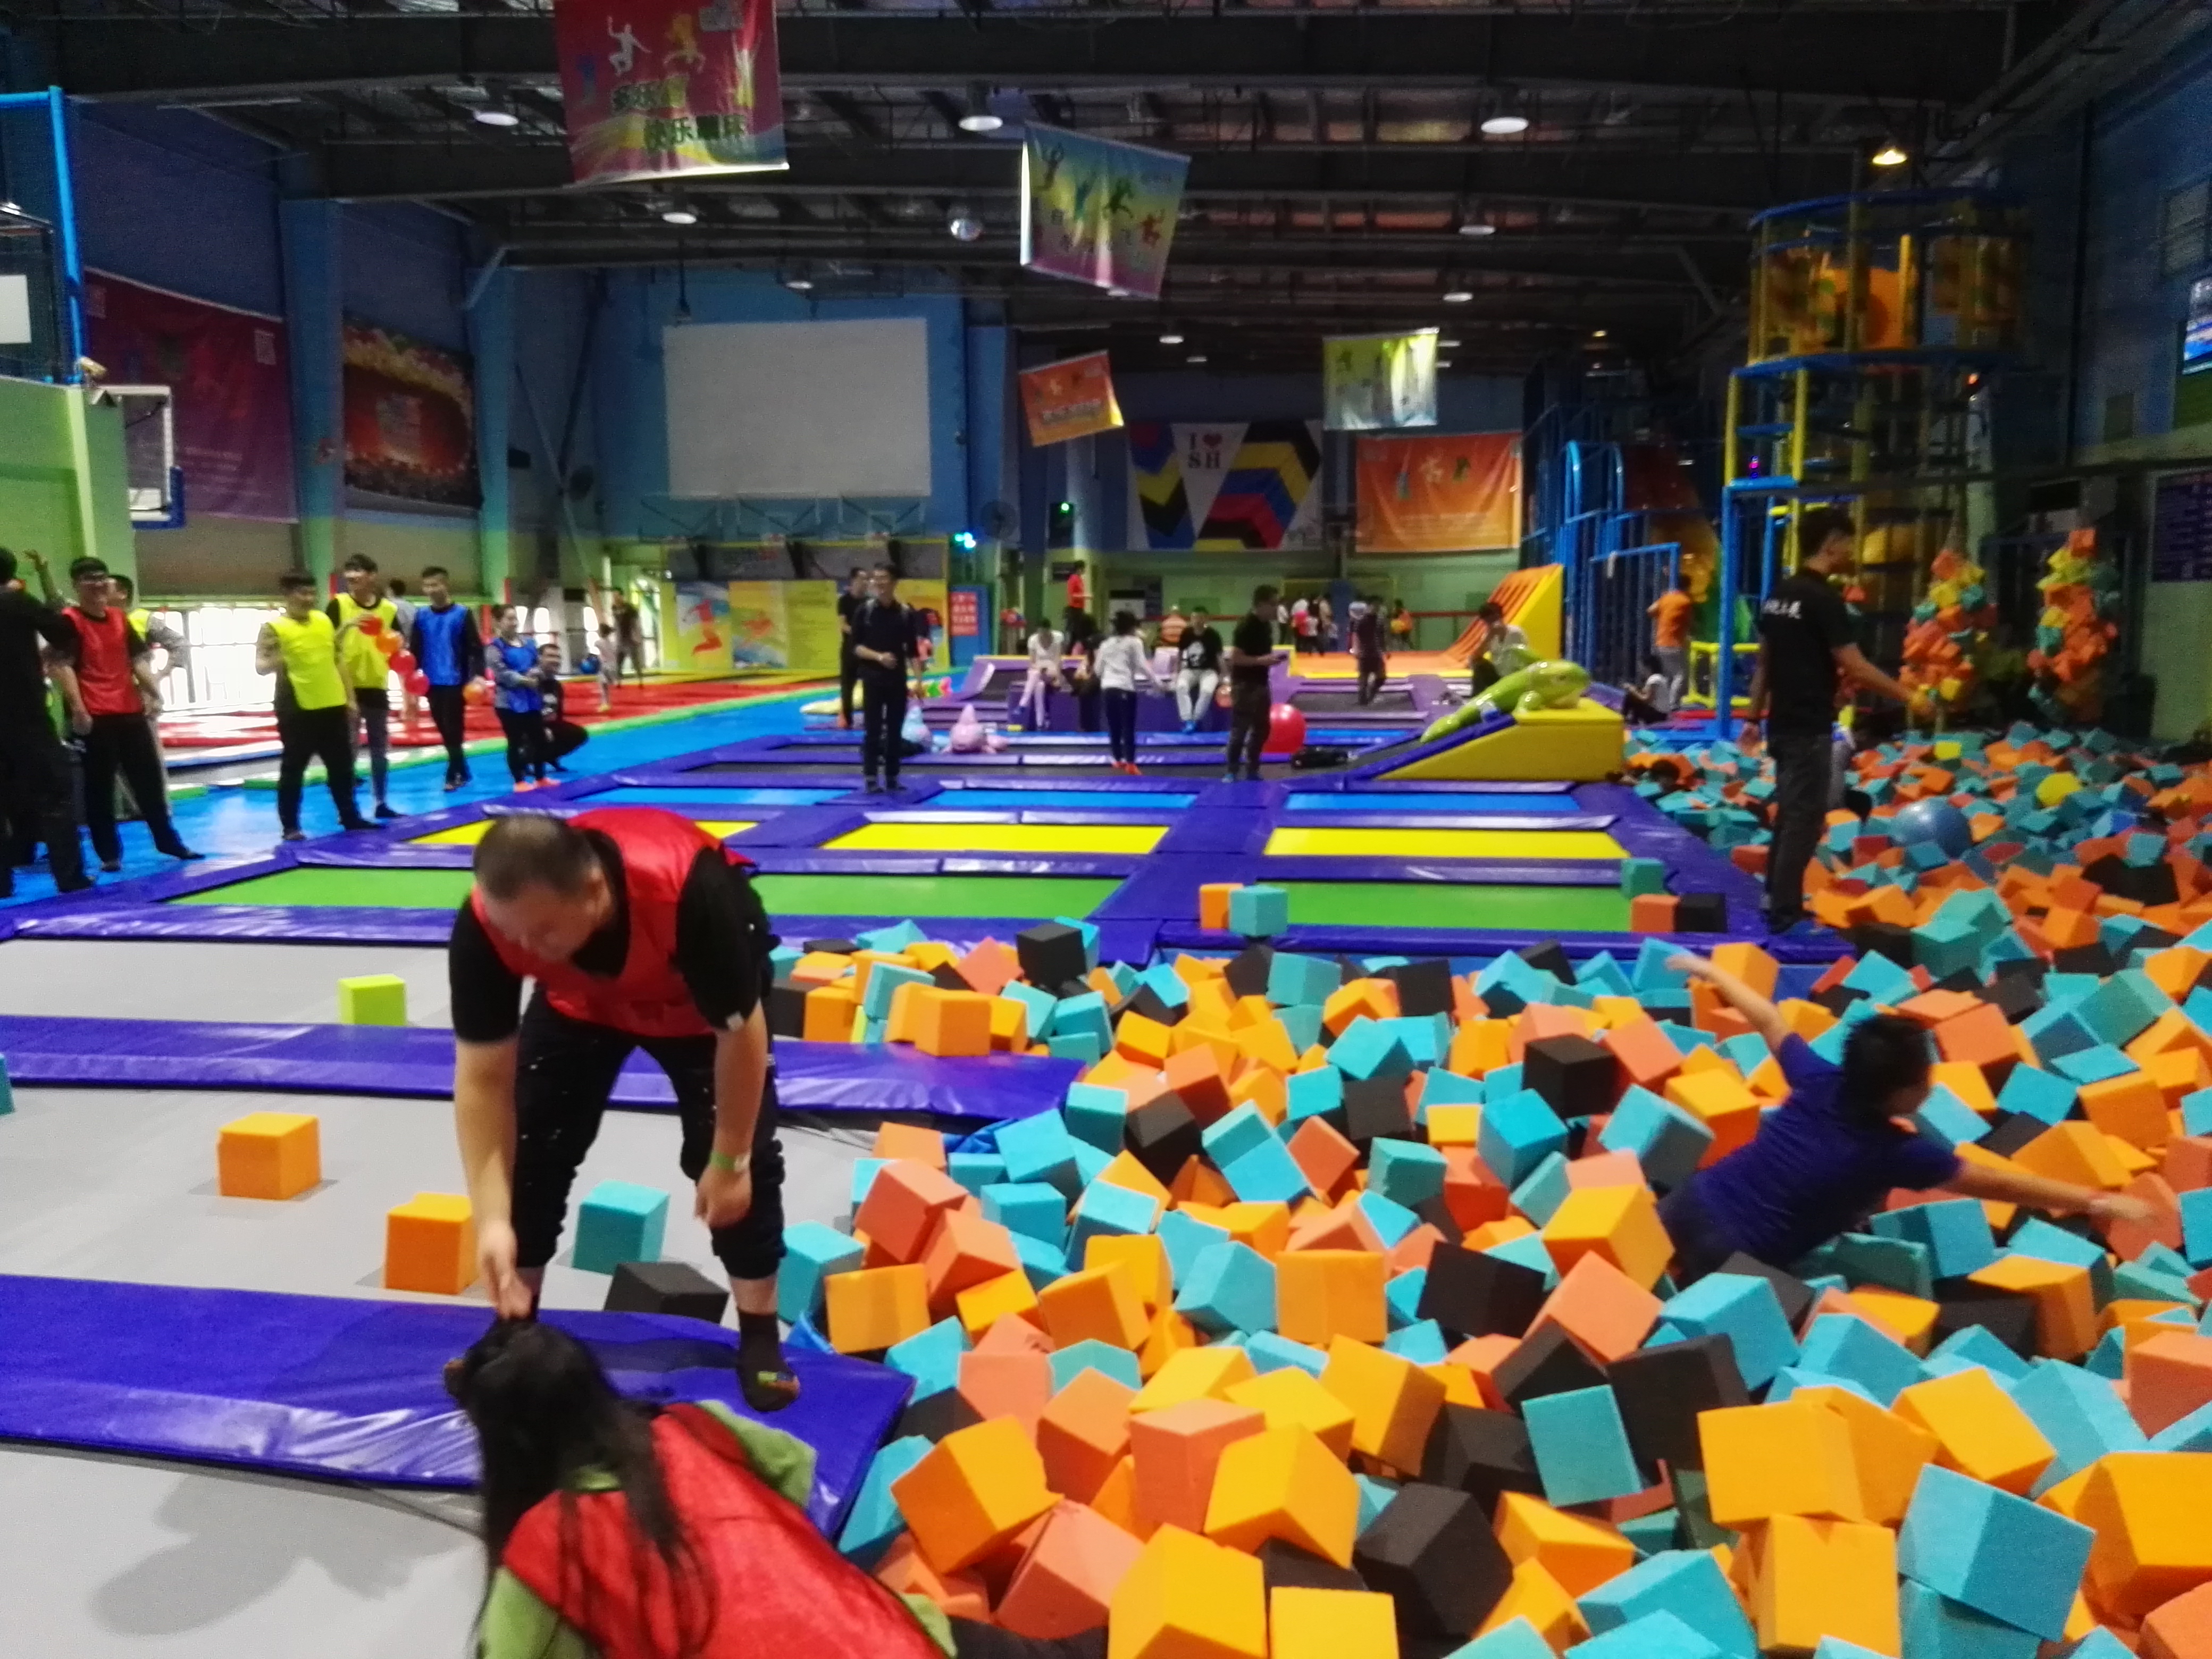 How to care and maintenance the trampoline park?